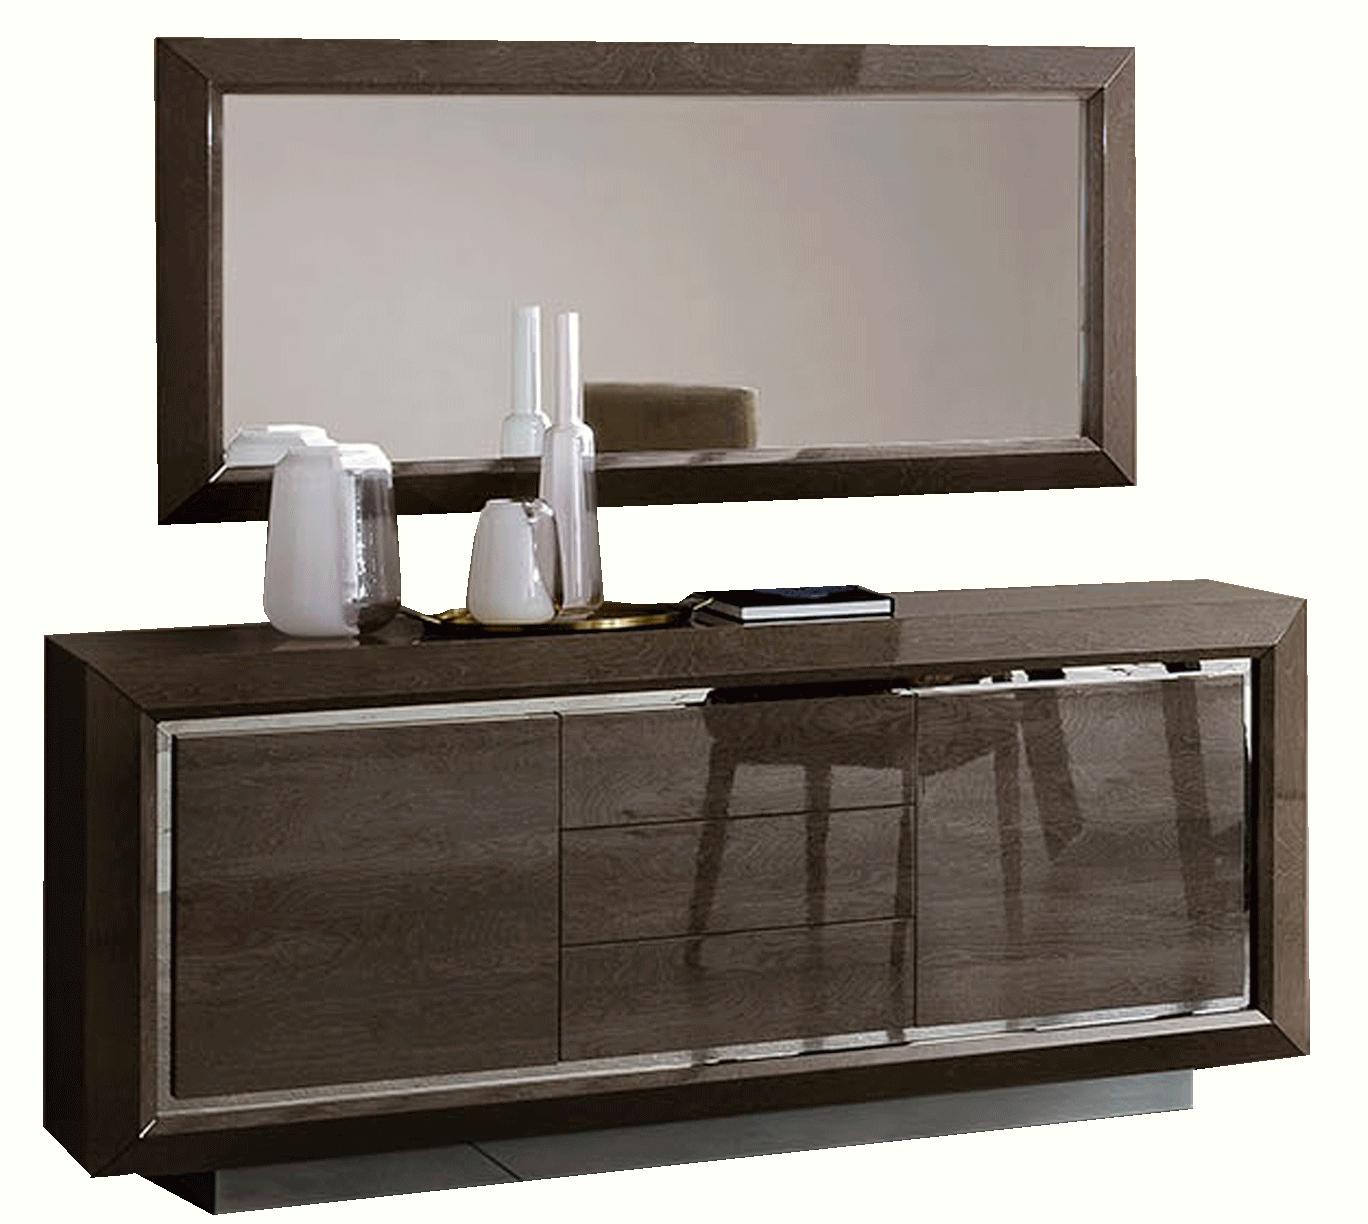 Contemporary, Modern Dining Table Set Elite ELITE-TABLE-8PC in Silver, Brown Faux Leather